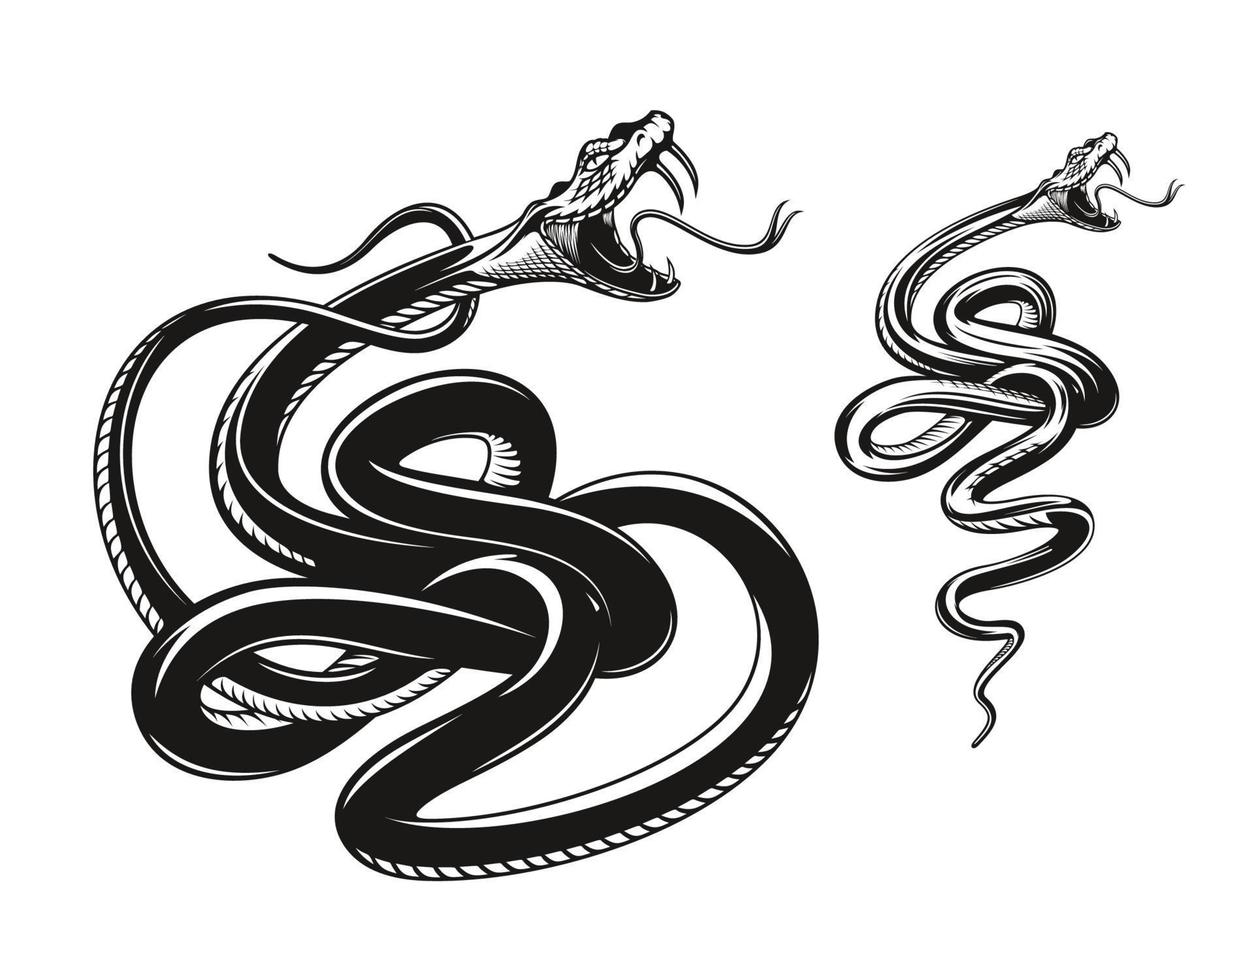 3. 30+ Rattlesnake Tattoo Designs and Ideas - wide 5